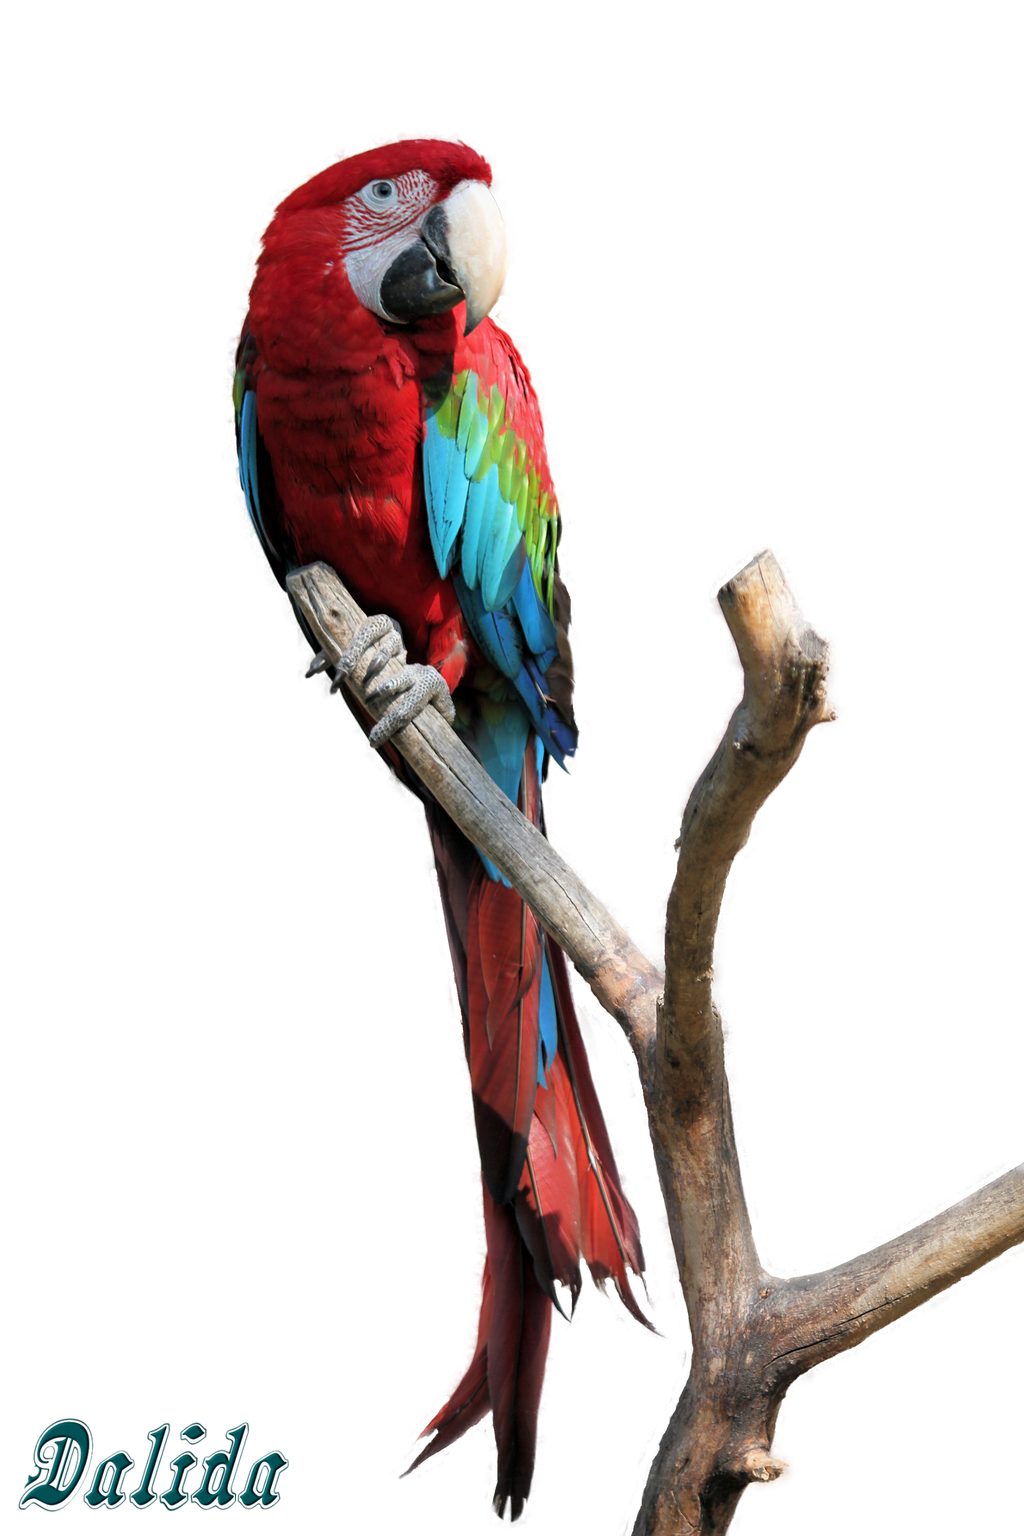 The Cost of Macaw Birds